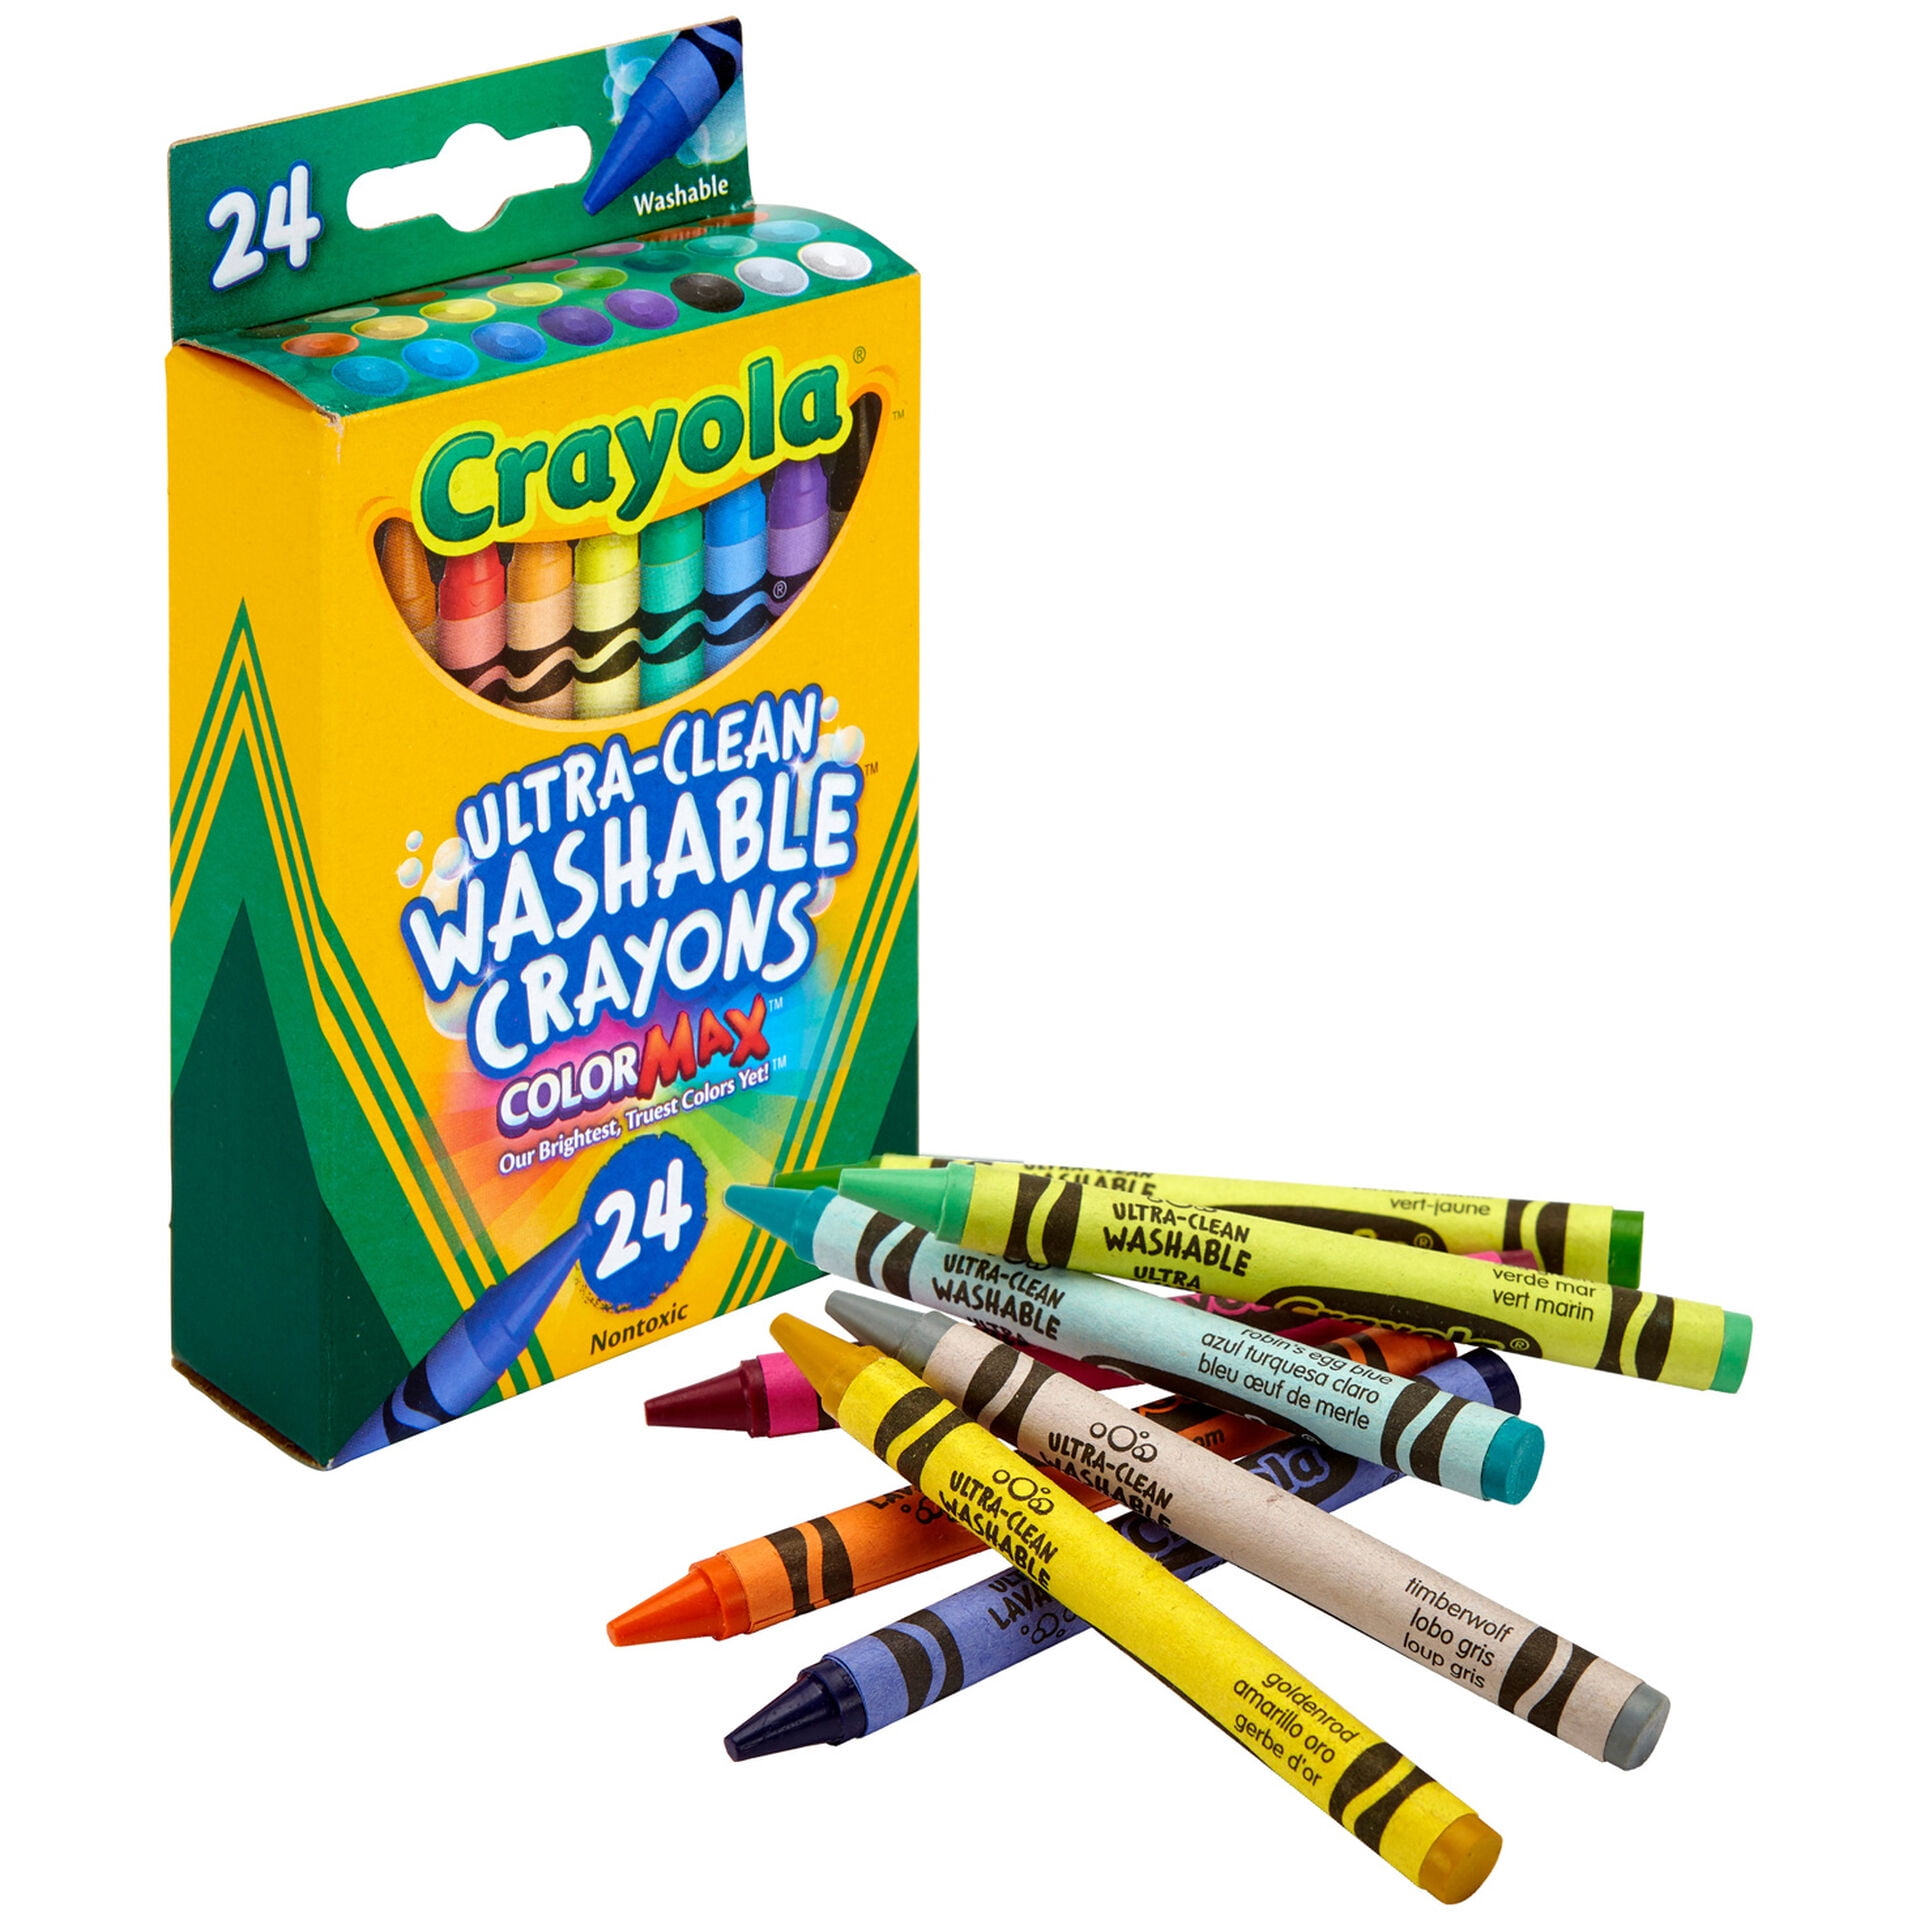 Crayola Ultra-Clean Washable Crayons 52-69 – Good's Store Online